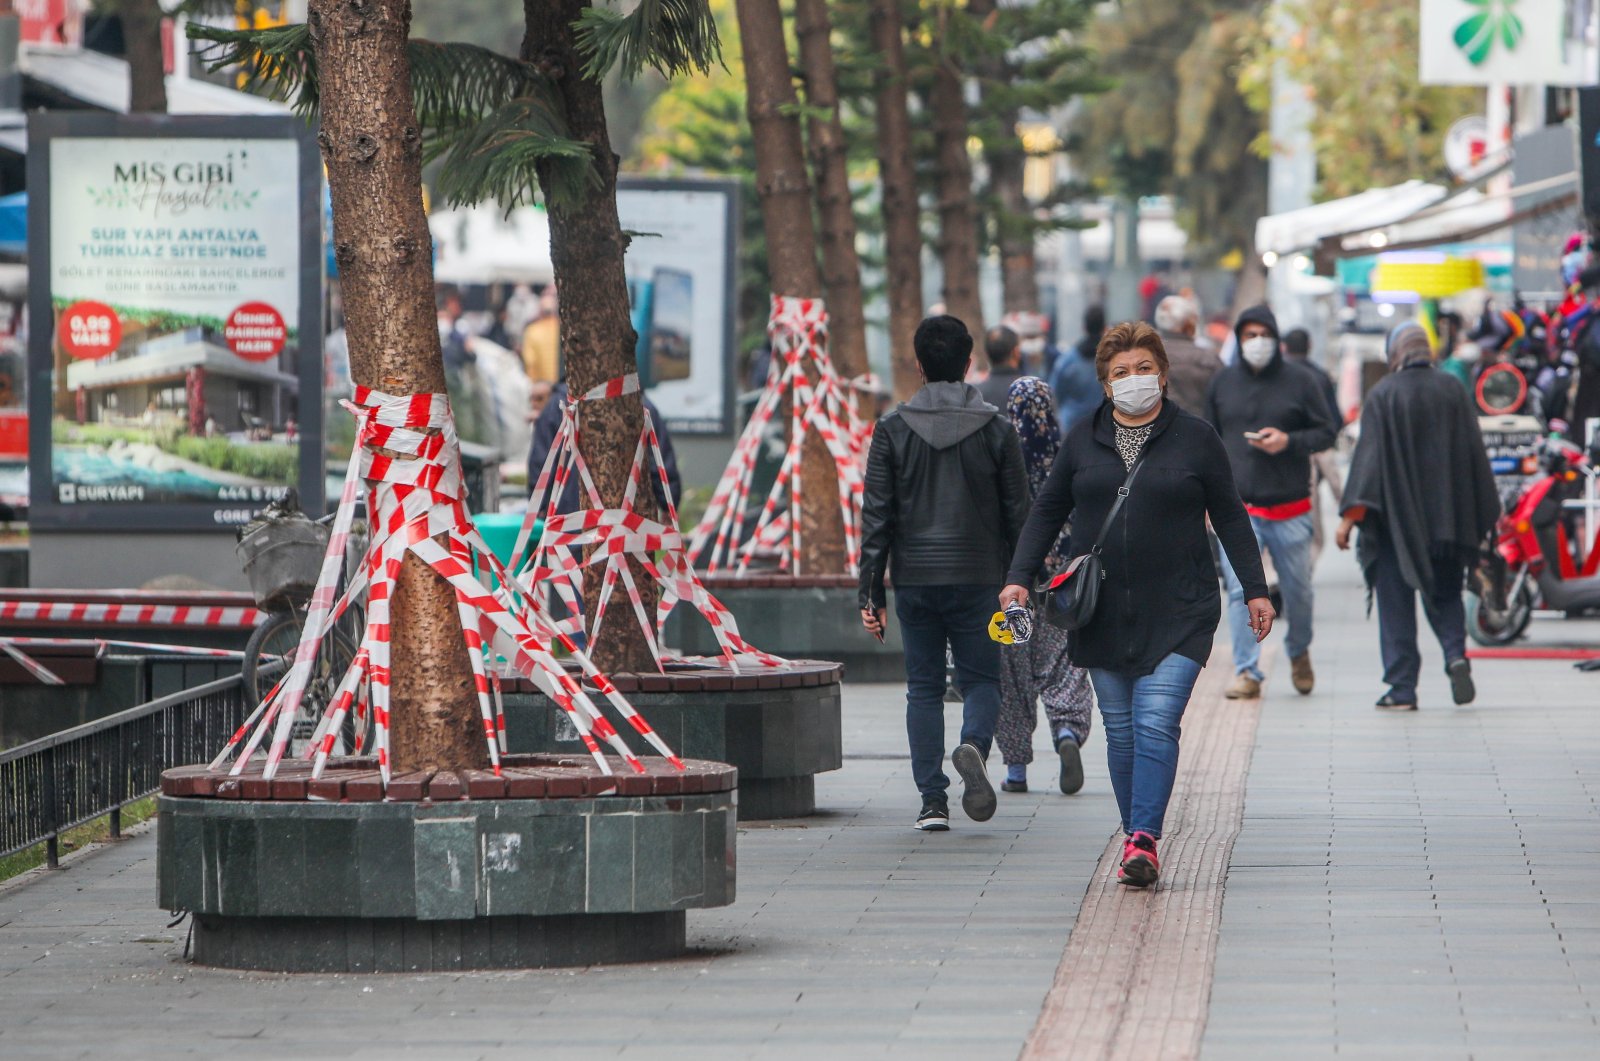 People wearing protective masks walk next to benches covered with tape to prevent crowding, in Antalya, southern Turkey, Dec. 7, 2020. (DHA Photo)